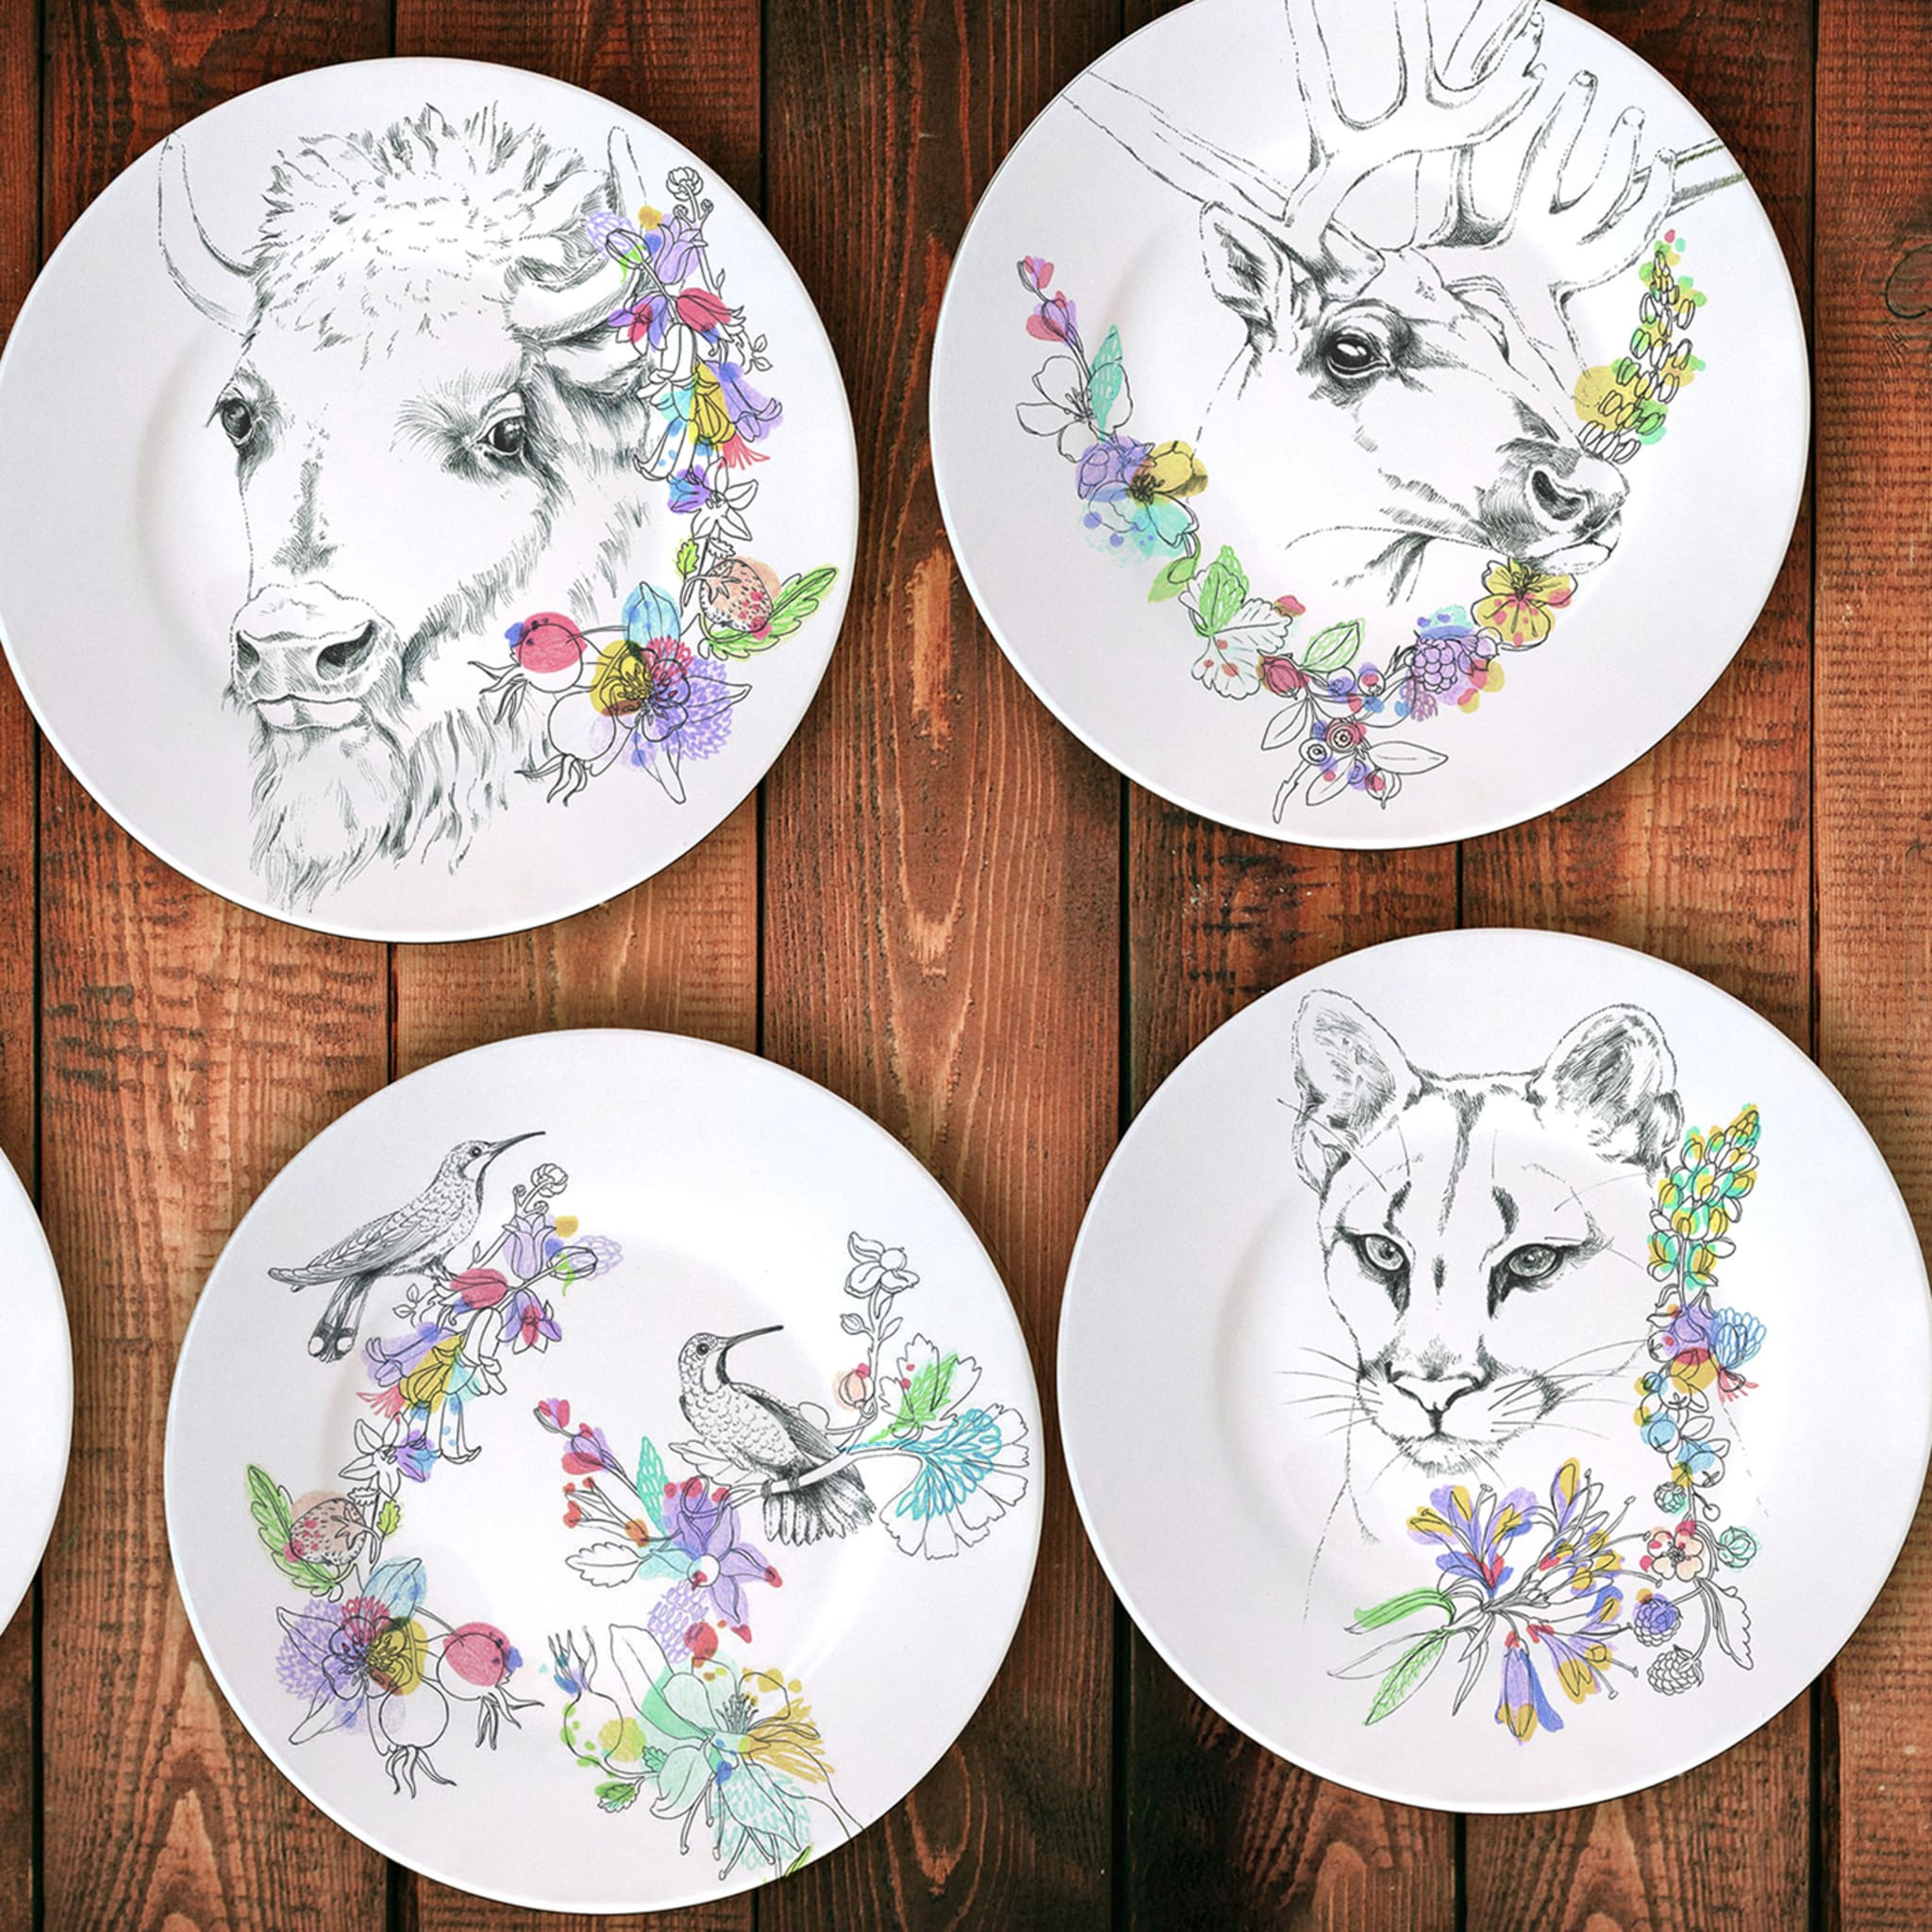 An Ode To The Woods Caribou Dinner Plate - Alternative view 2